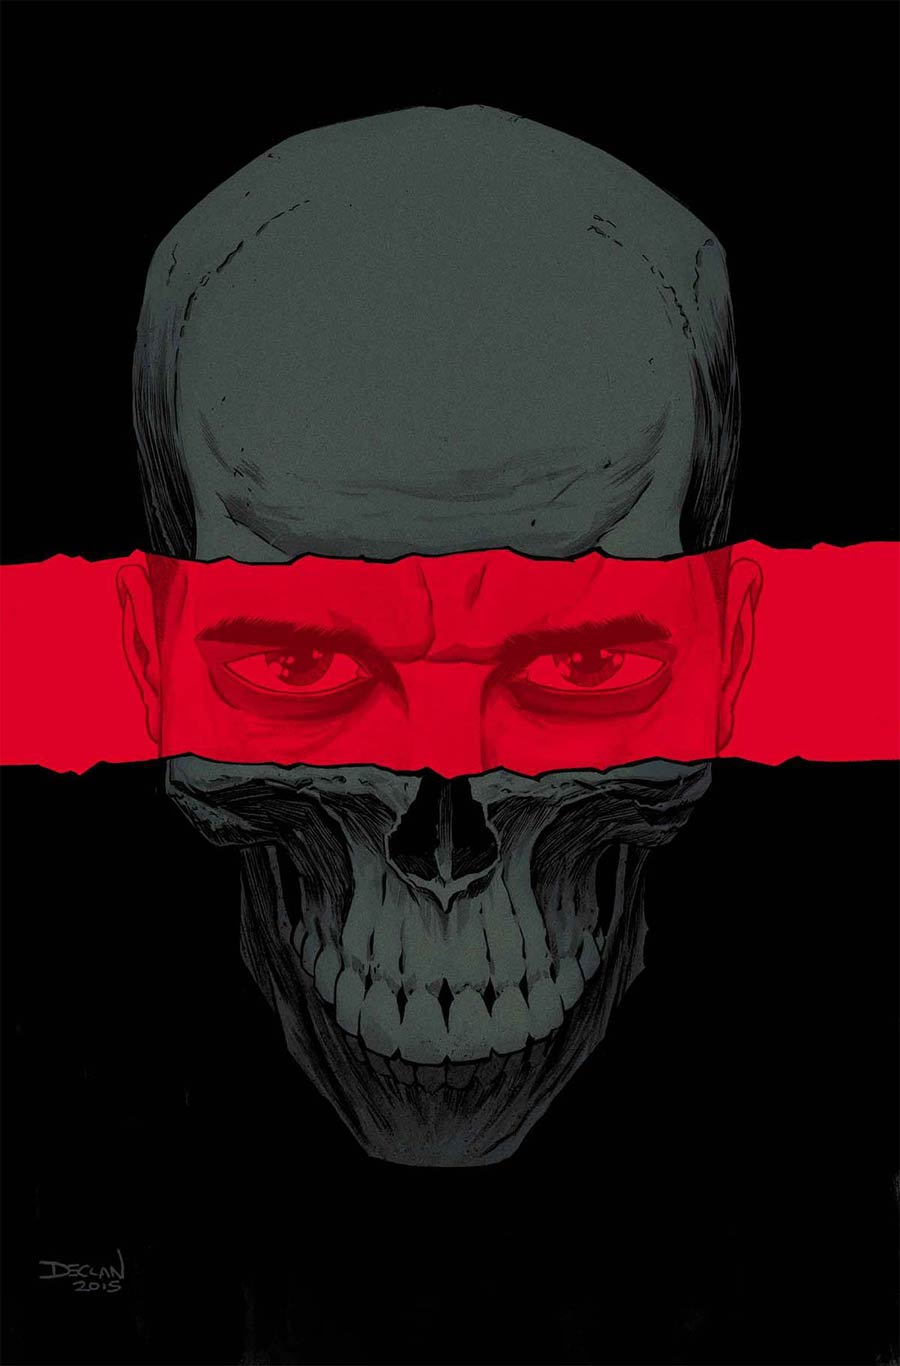 Punisher Vol 10 #1 By Declan Shalvey Poster